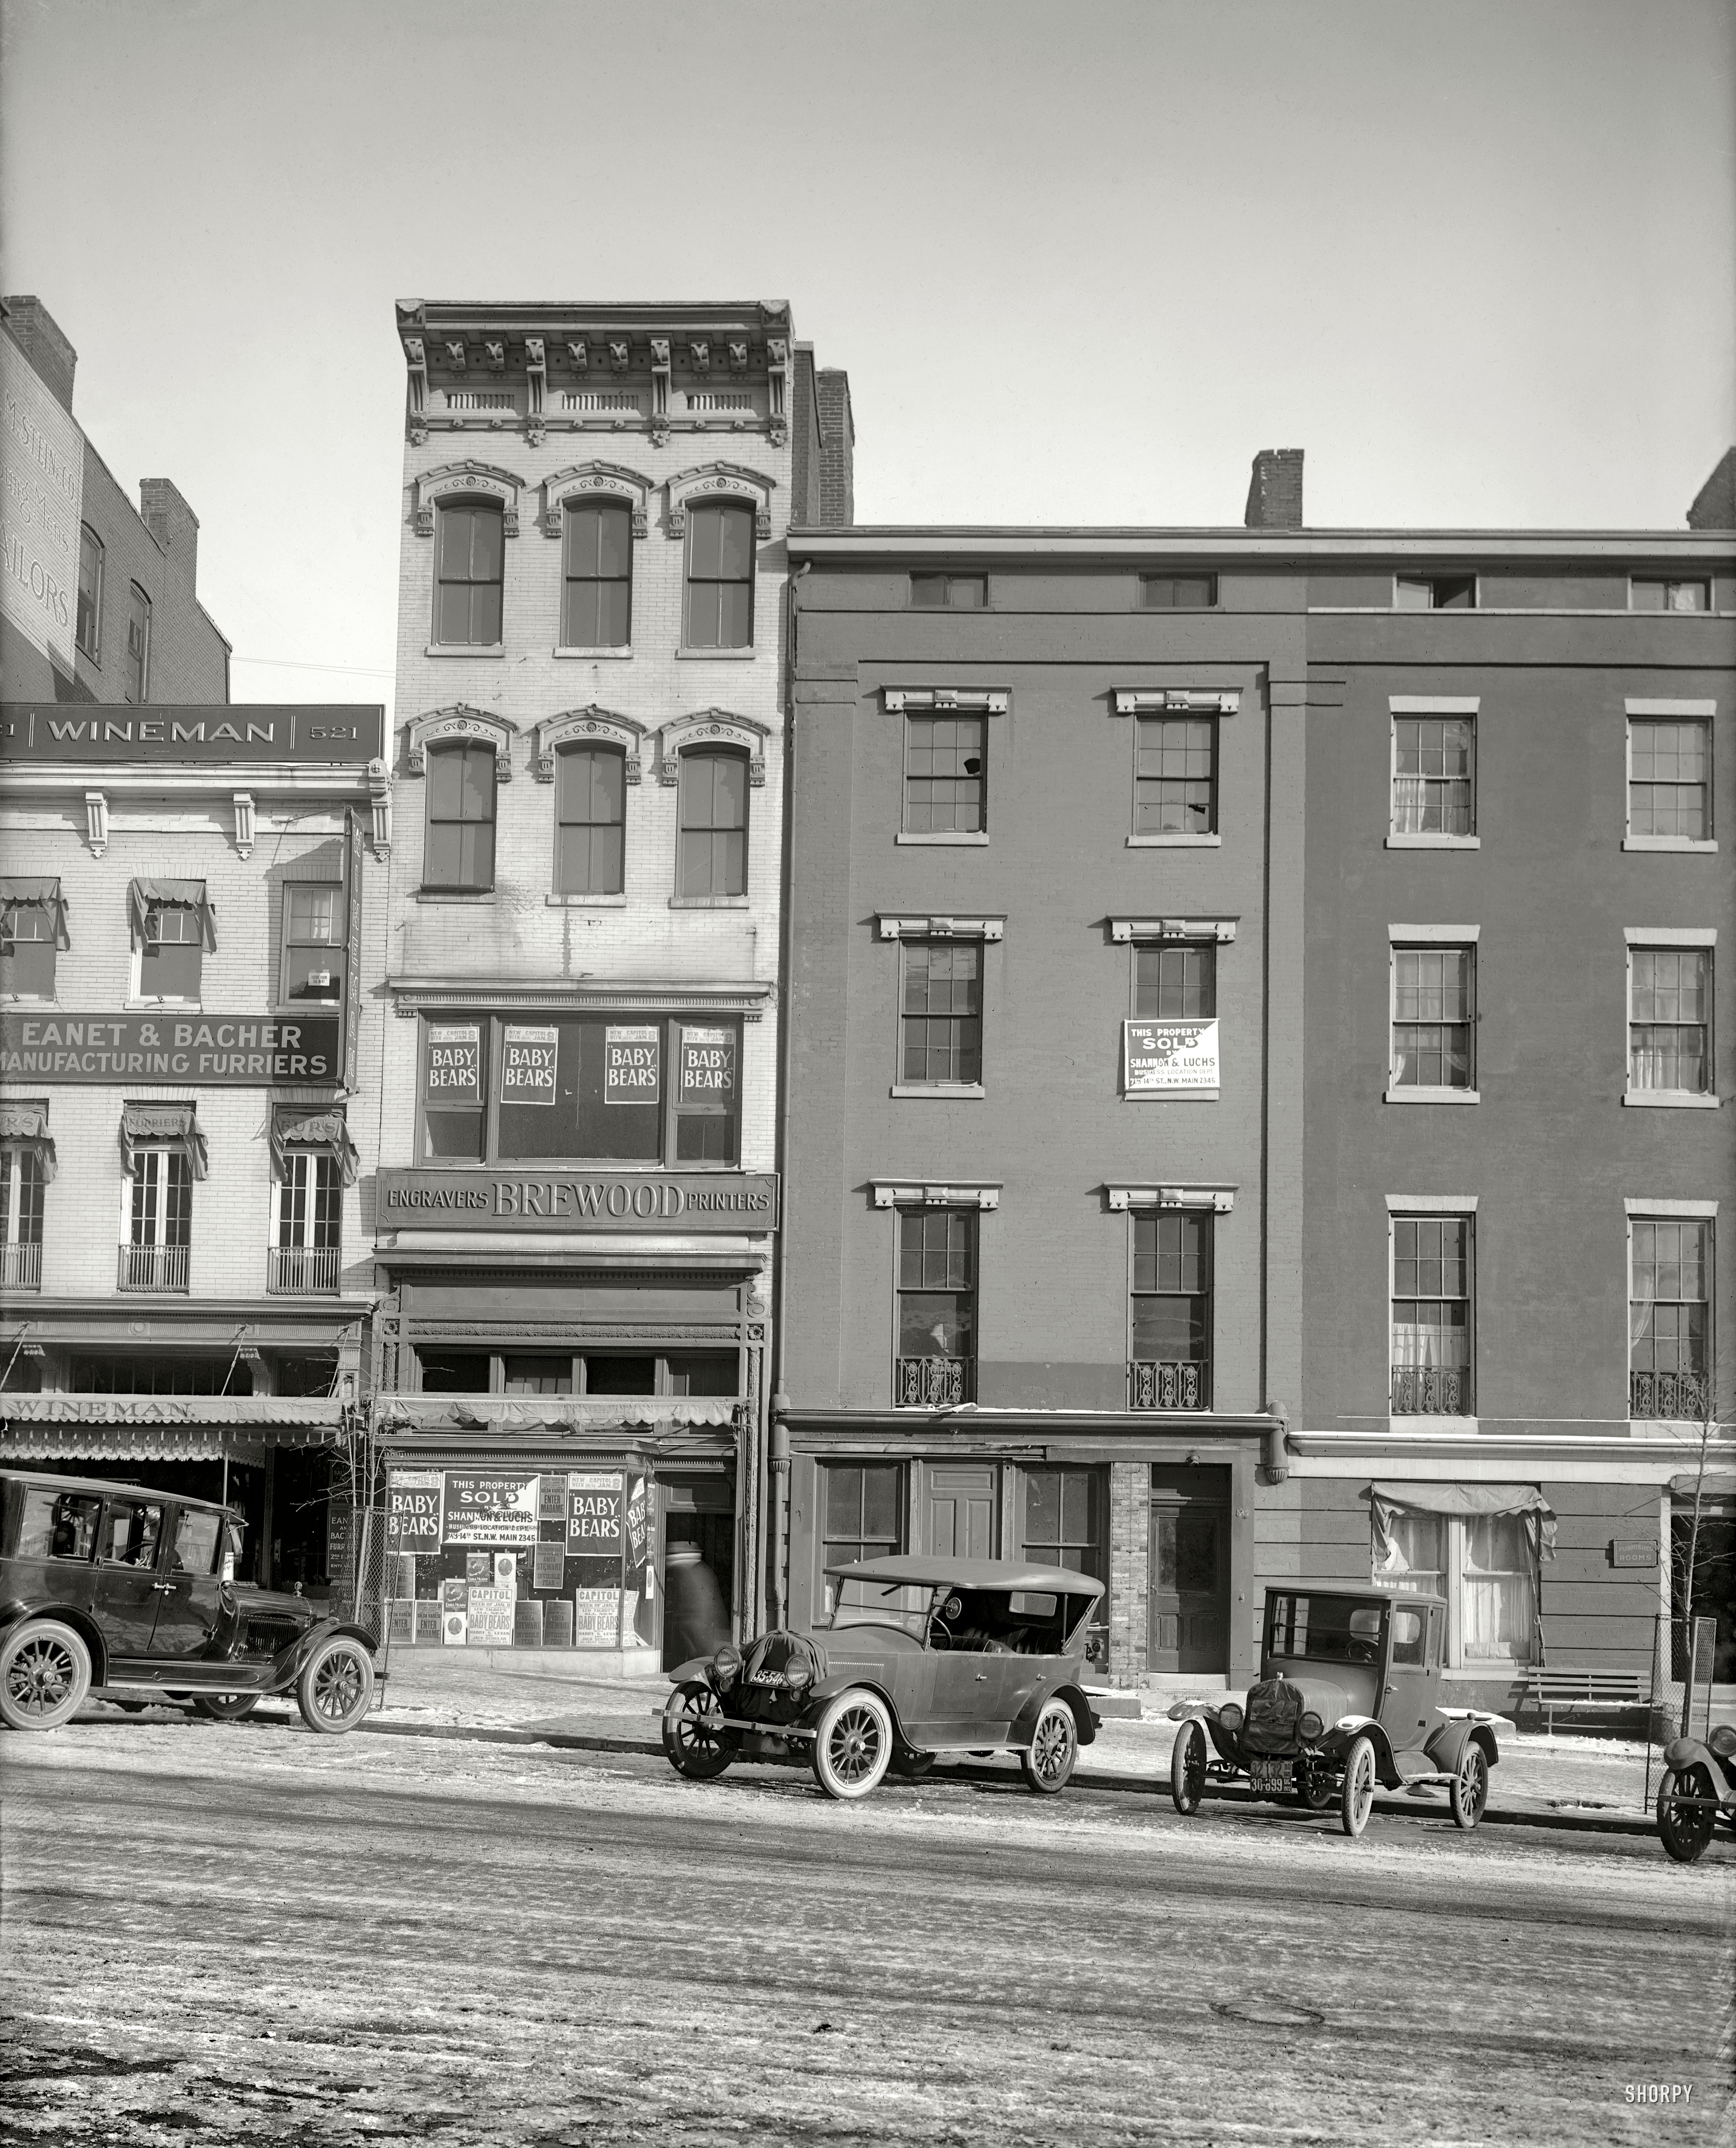 Washington, D.C., January 1922. "517-19 Thirteenth Street." Another of those National Photo portal-to-the-past streetscapes that must have seemed very prosaic at the time they were taken. 8x10 glass negative. View full size.